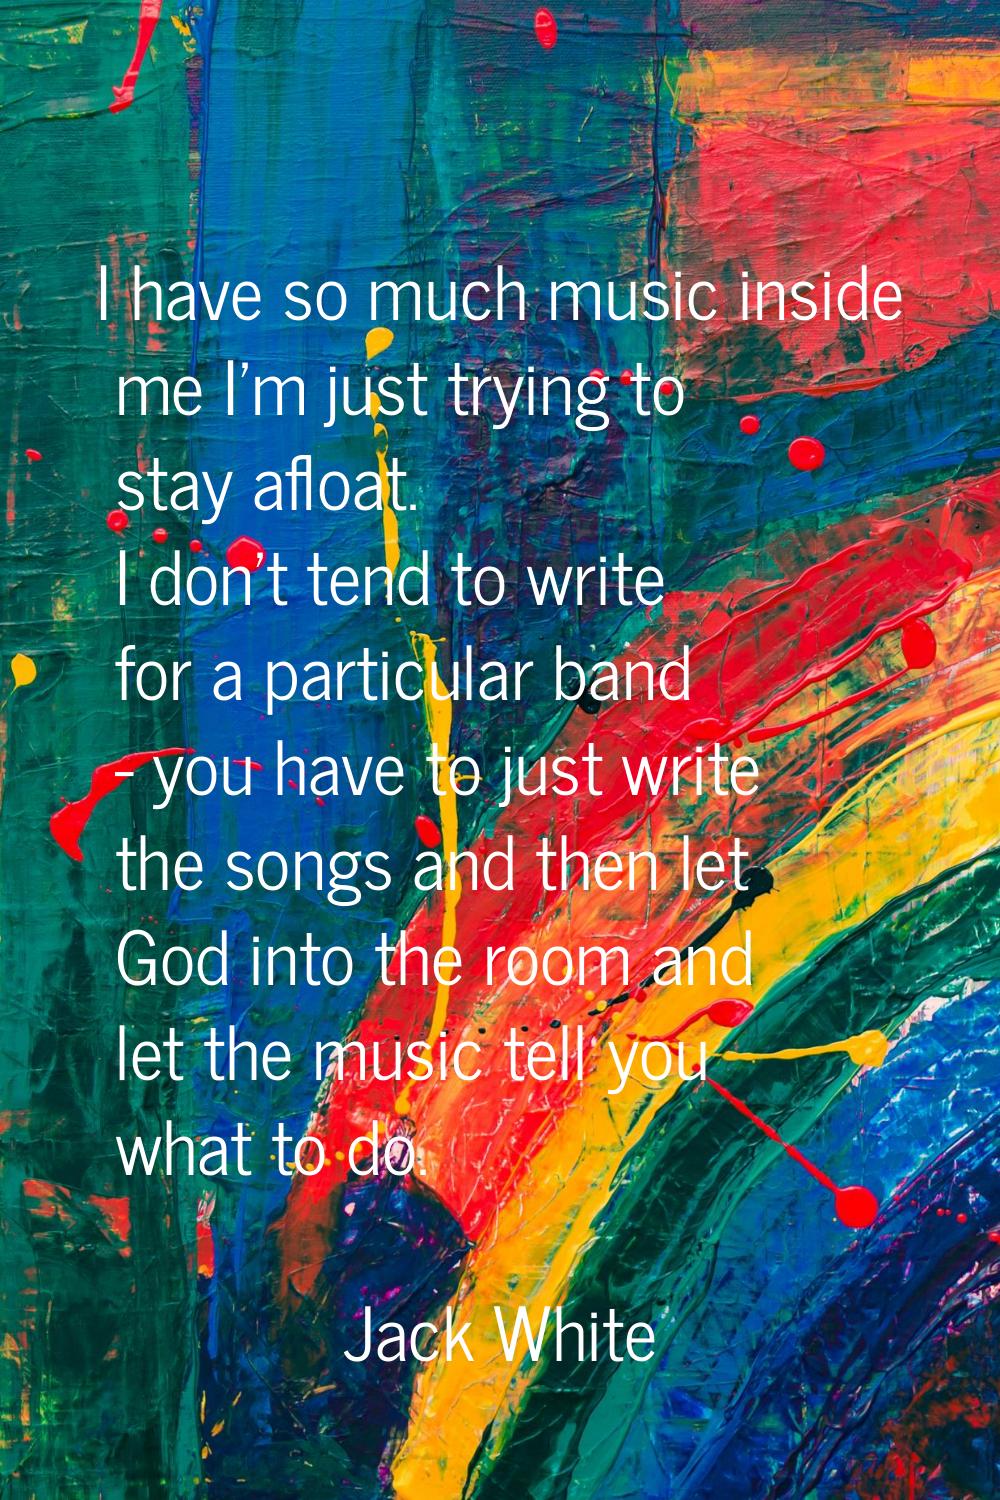 I have so much music inside me I'm just trying to stay afloat. I don't tend to write for a particul